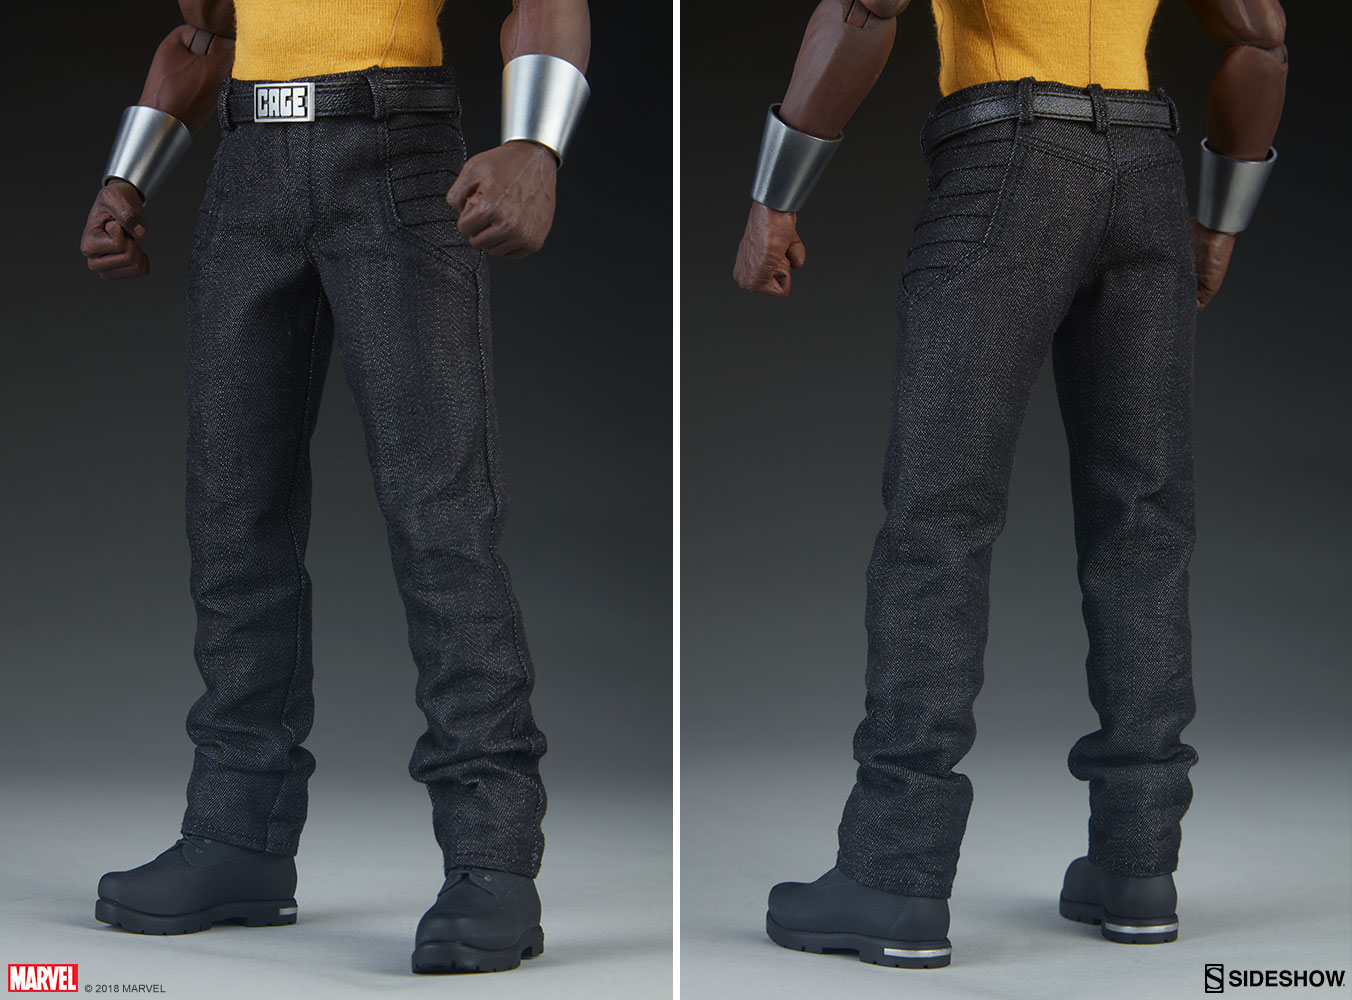 sideshow - NEW PRODUCT: Luke Cage Sixth Scale Figure by Sideshow Collectibles 1425